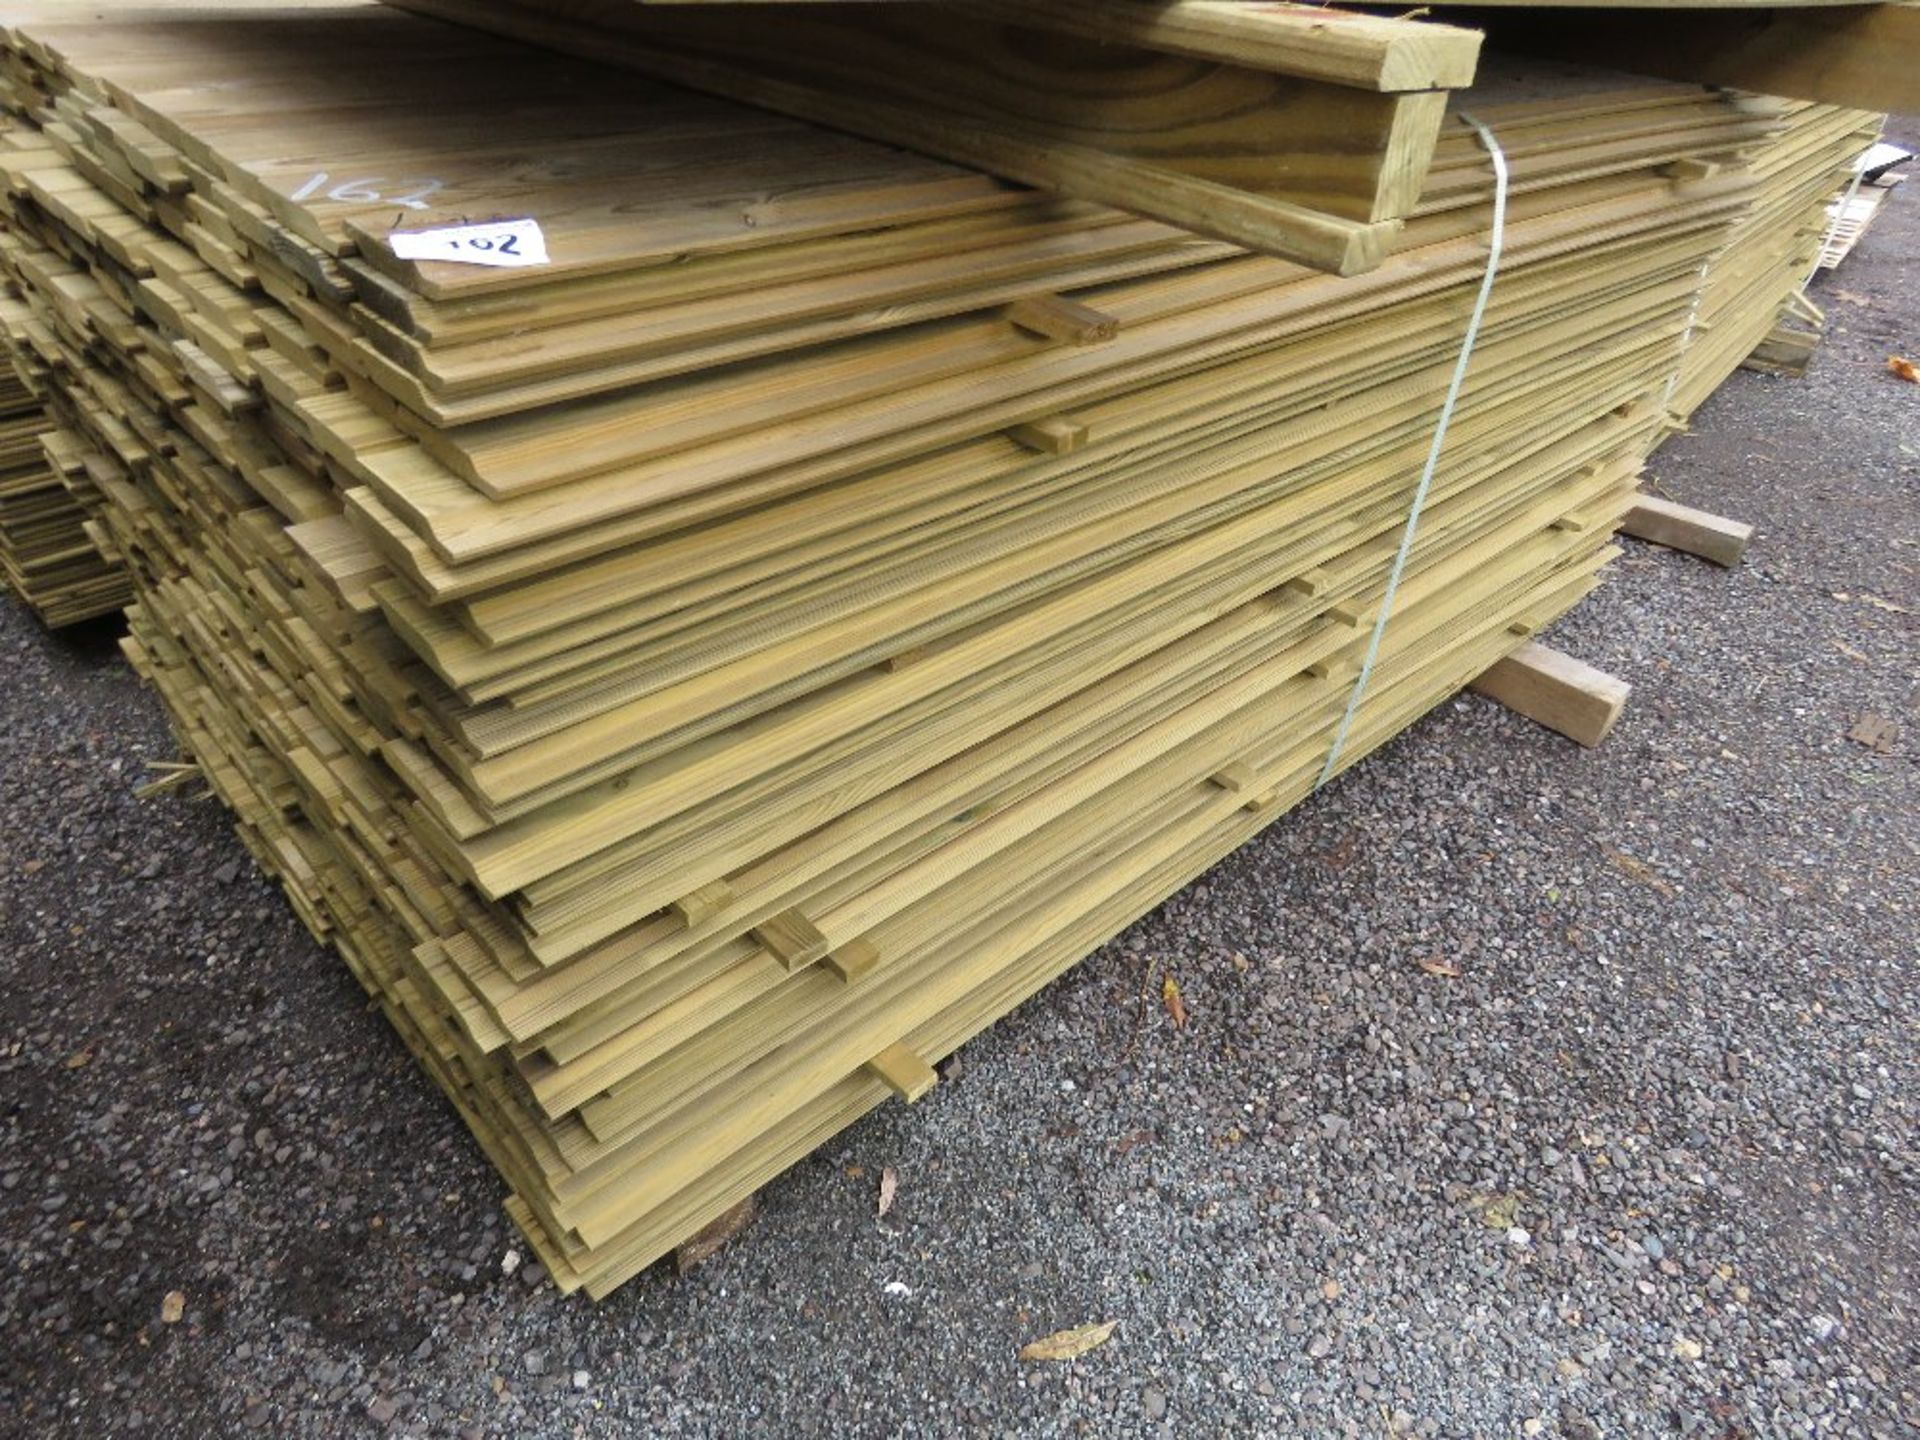 LARGE PACK OF TREATED SHIPLAP TIMBER CLADDING BOARDS. 1.73M LENGTH X 95MM WIDTH APPROX.